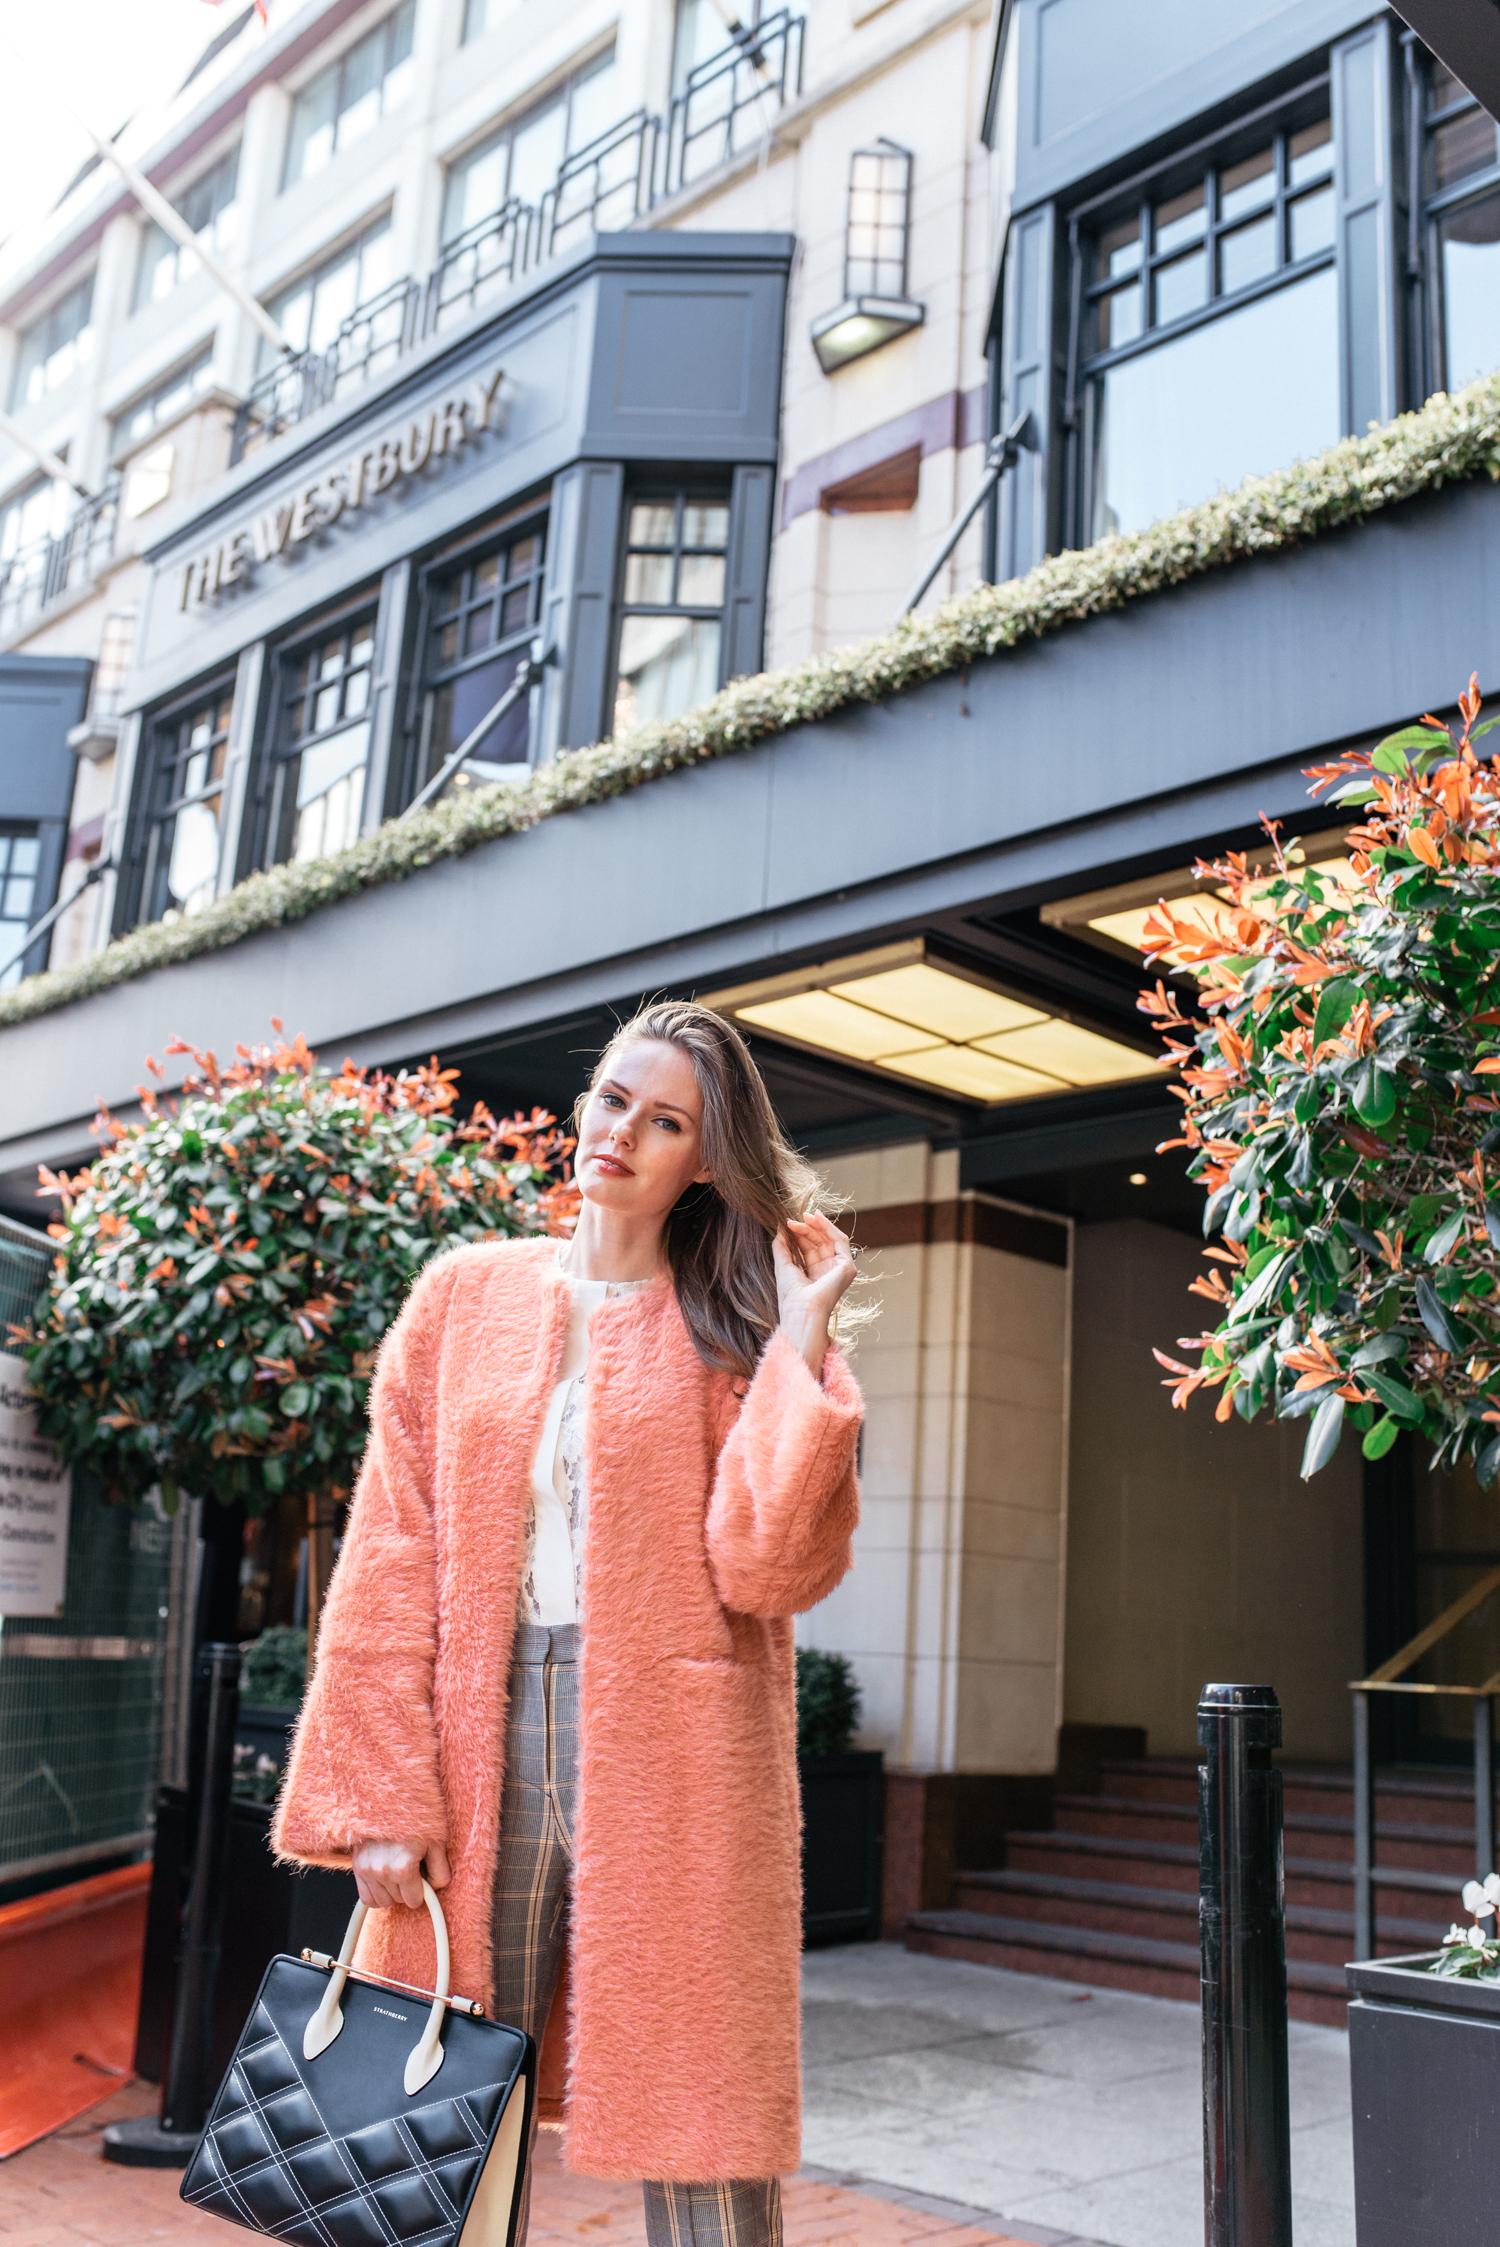 Alyssa Campanella of The A List blog visits The Westbury in Dublin, Ireland wearing By Tsang Fuzzy II robe, Maje Puya plaid pants, and Strathberry quilted midi tote